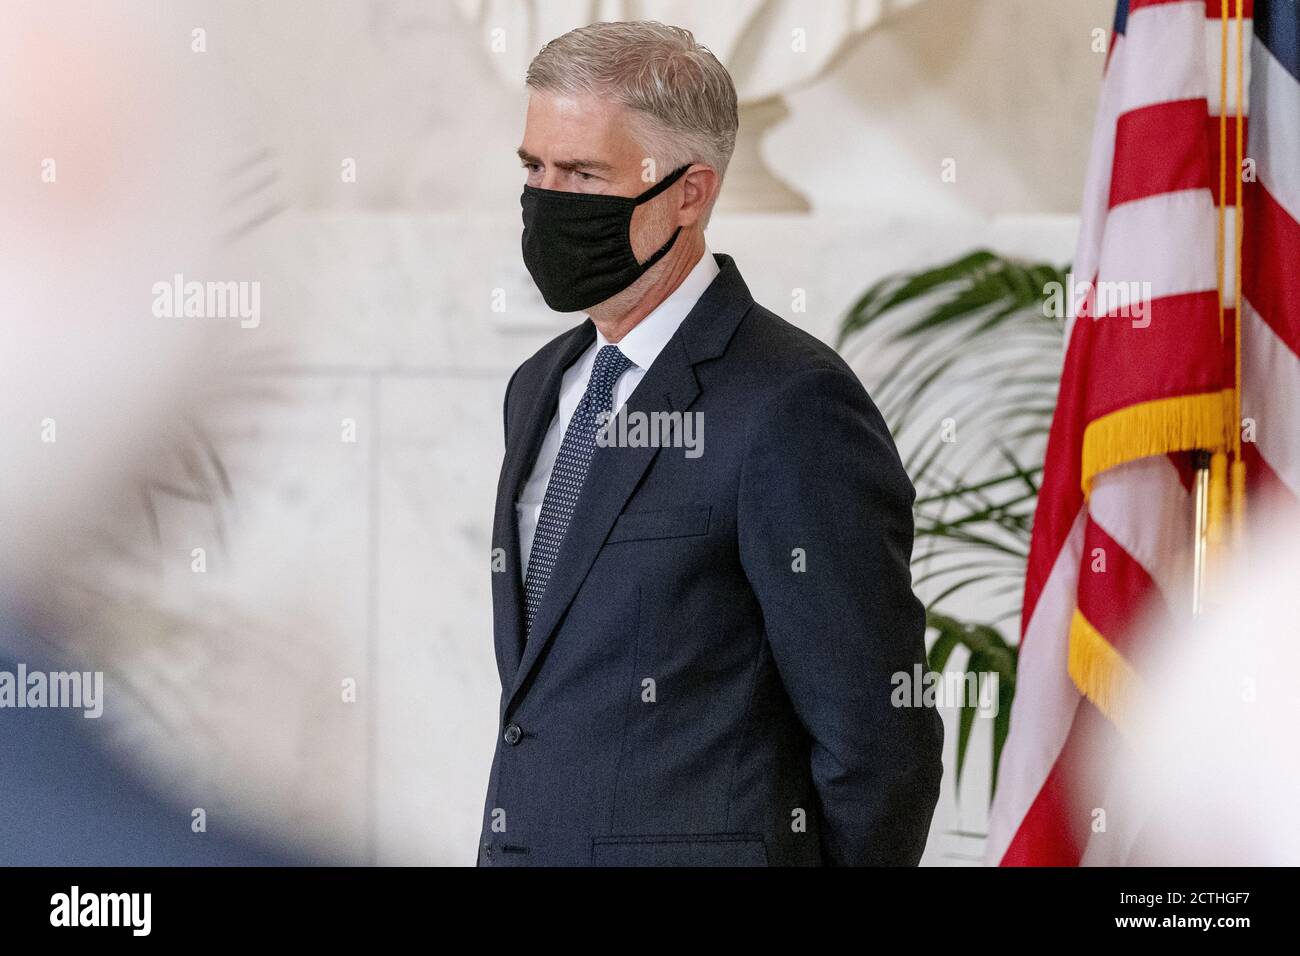 Washington, United States. 23rd Sep, 2020. Justice Neil Gorsuch stands during a private ceremony for Justice Ruth Bader Ginsburg at the Supreme Court in Washington, DC on Wednesday, September 23, 2020. Ginsburg, 87, died of cancer on September 18. Pool Photo by Andrew Harnik/UPI Credit: UPI/Alamy Live News Stock Photo